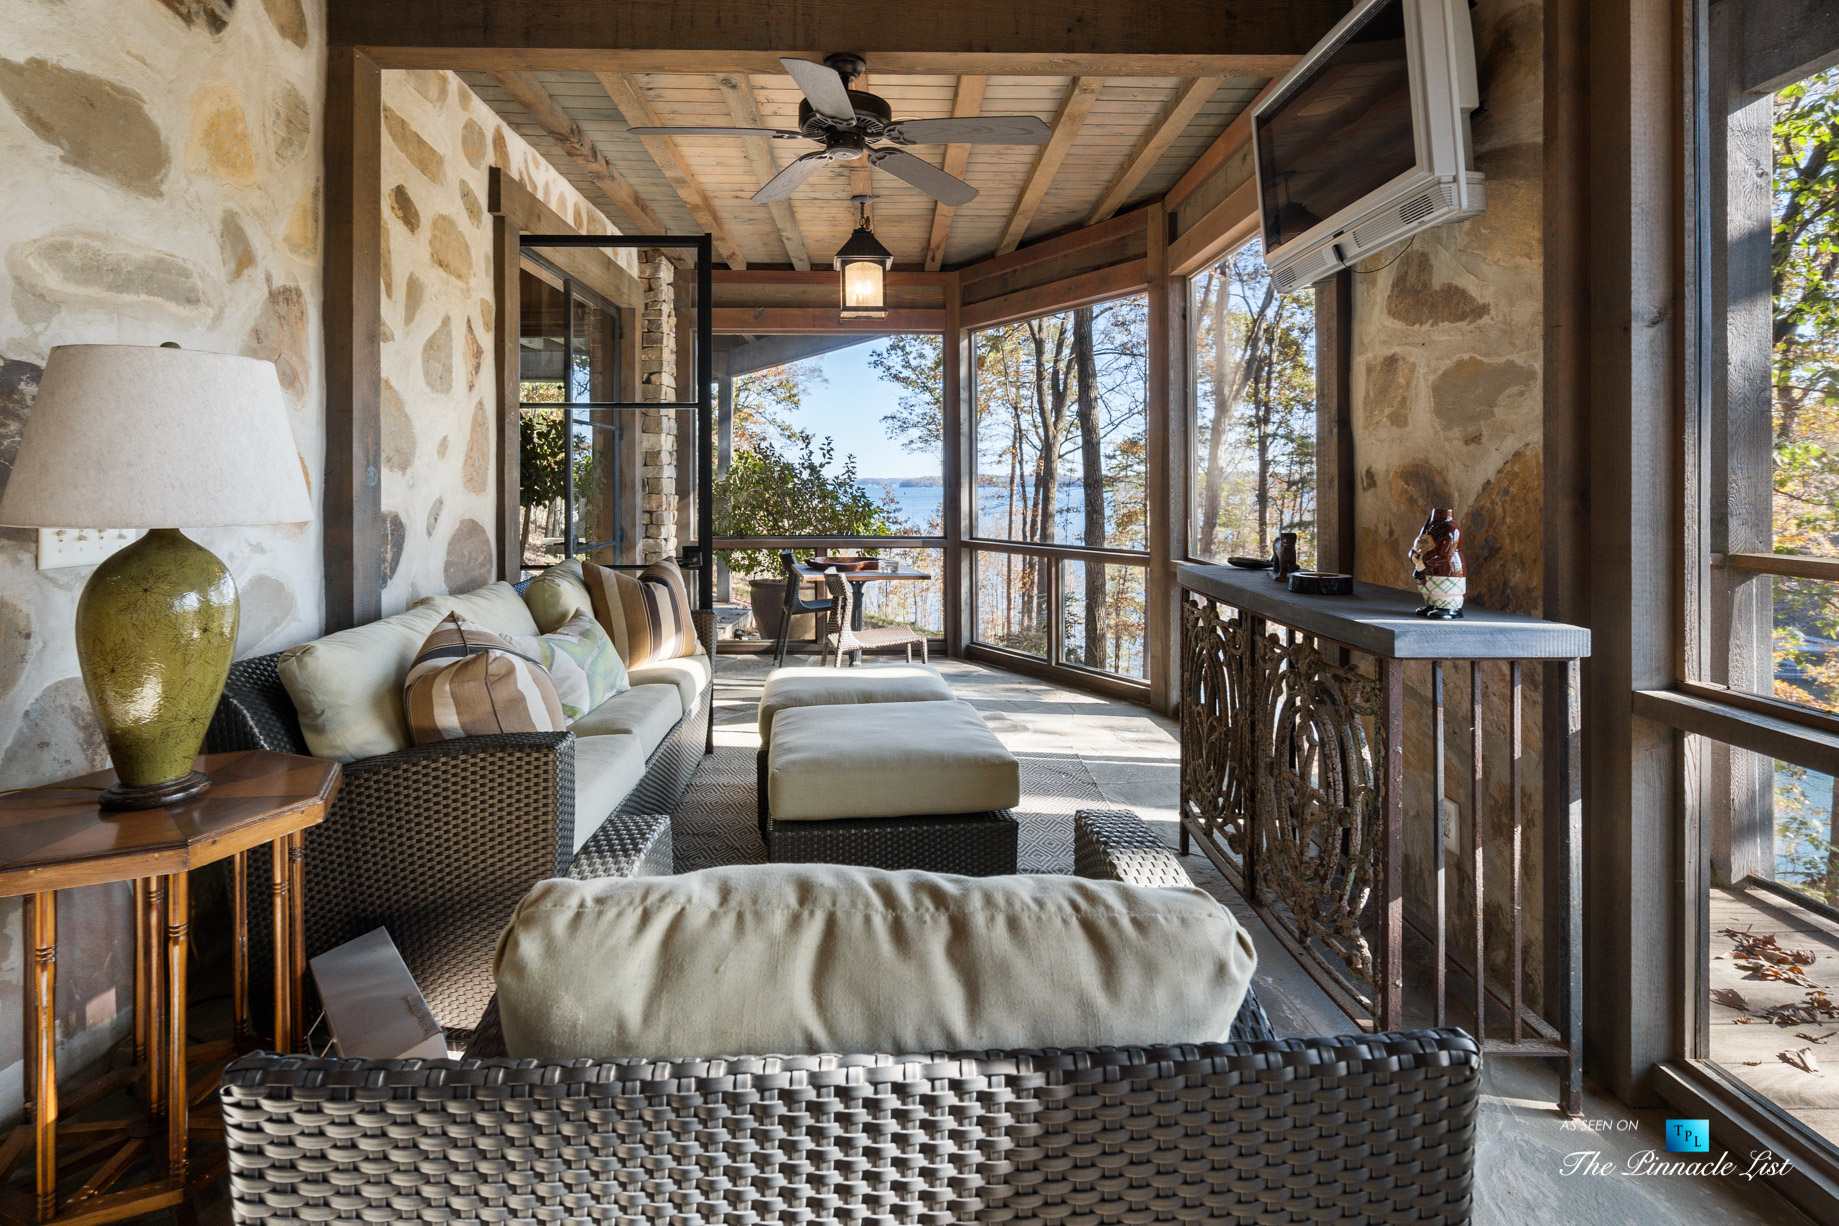 7860 Chestnut Hill Rd, Cumming, GA, USA - Covered Outdoor Deck - Luxury Real Estate - Lake Lanier Mid-Century Modern Stone Home